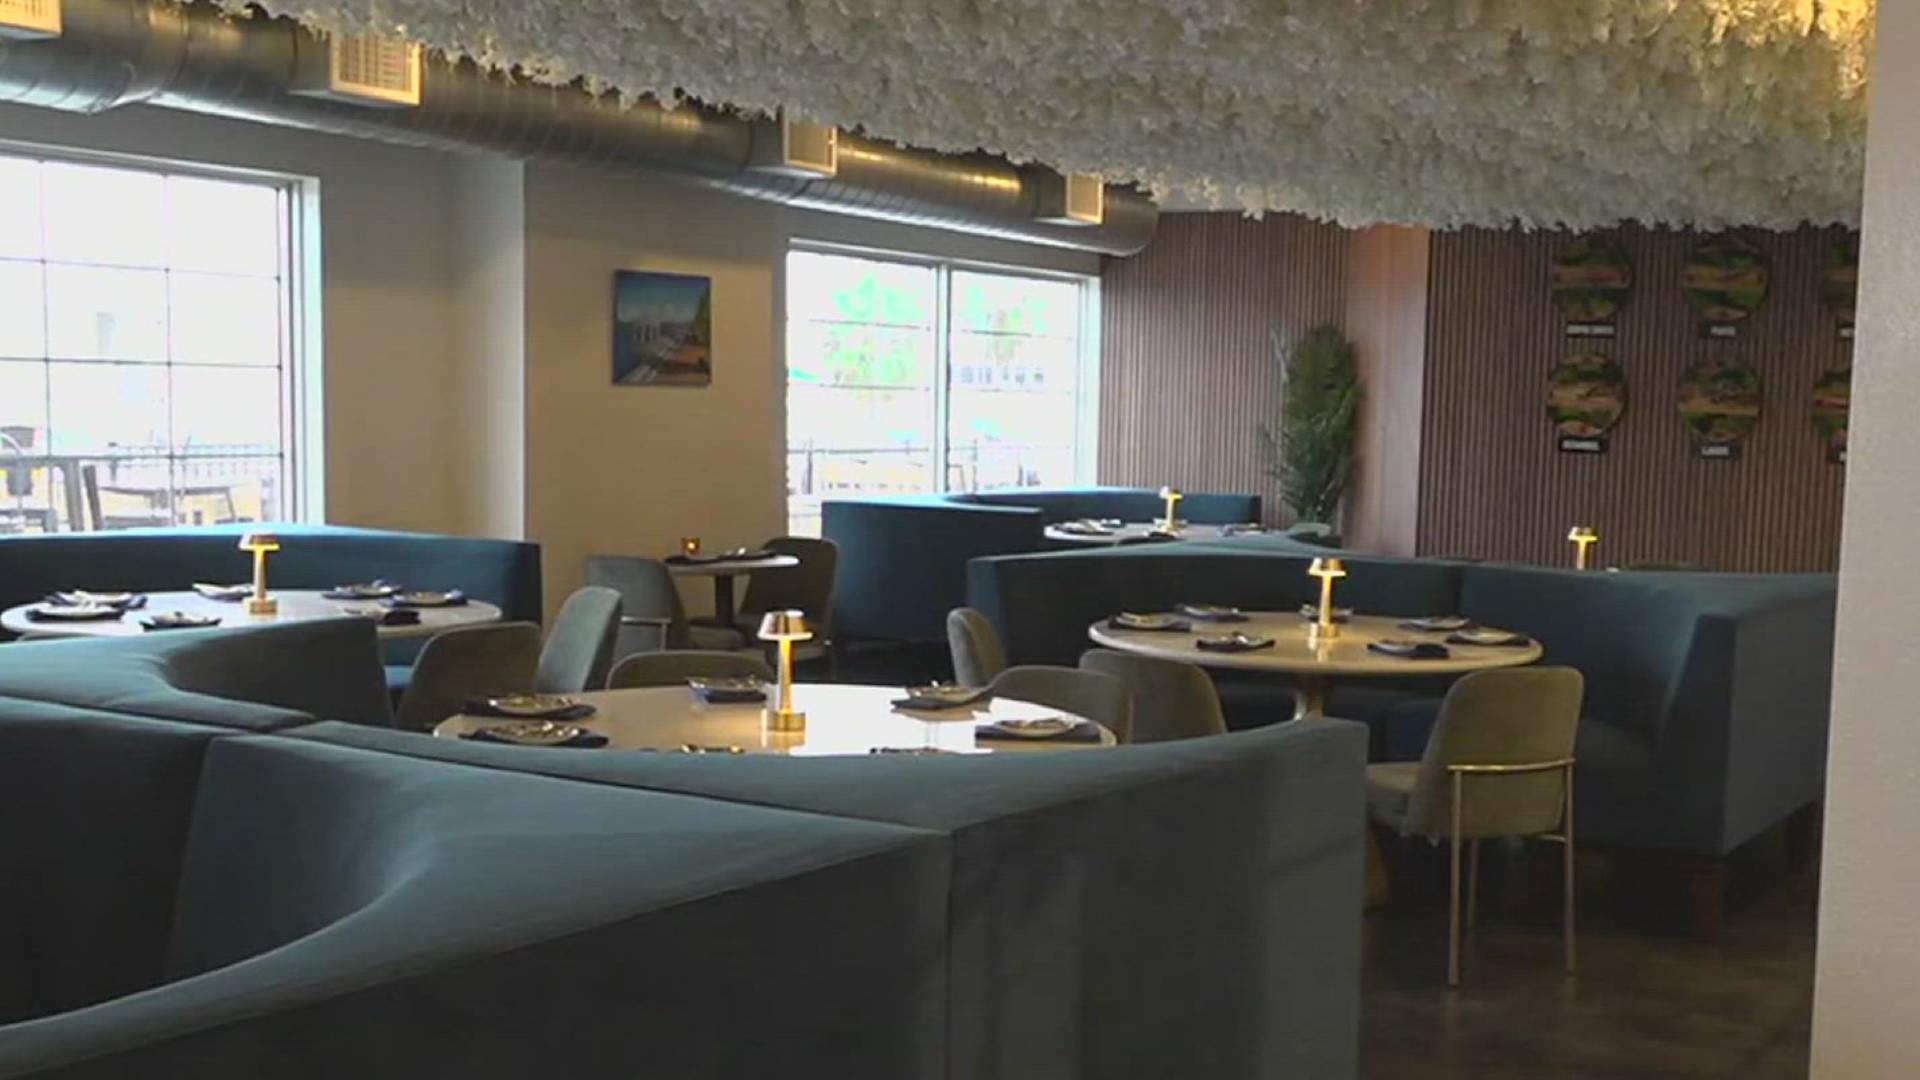 The restaurant, "Gallery 41", is part of the more than $2 million refresh for the art center.